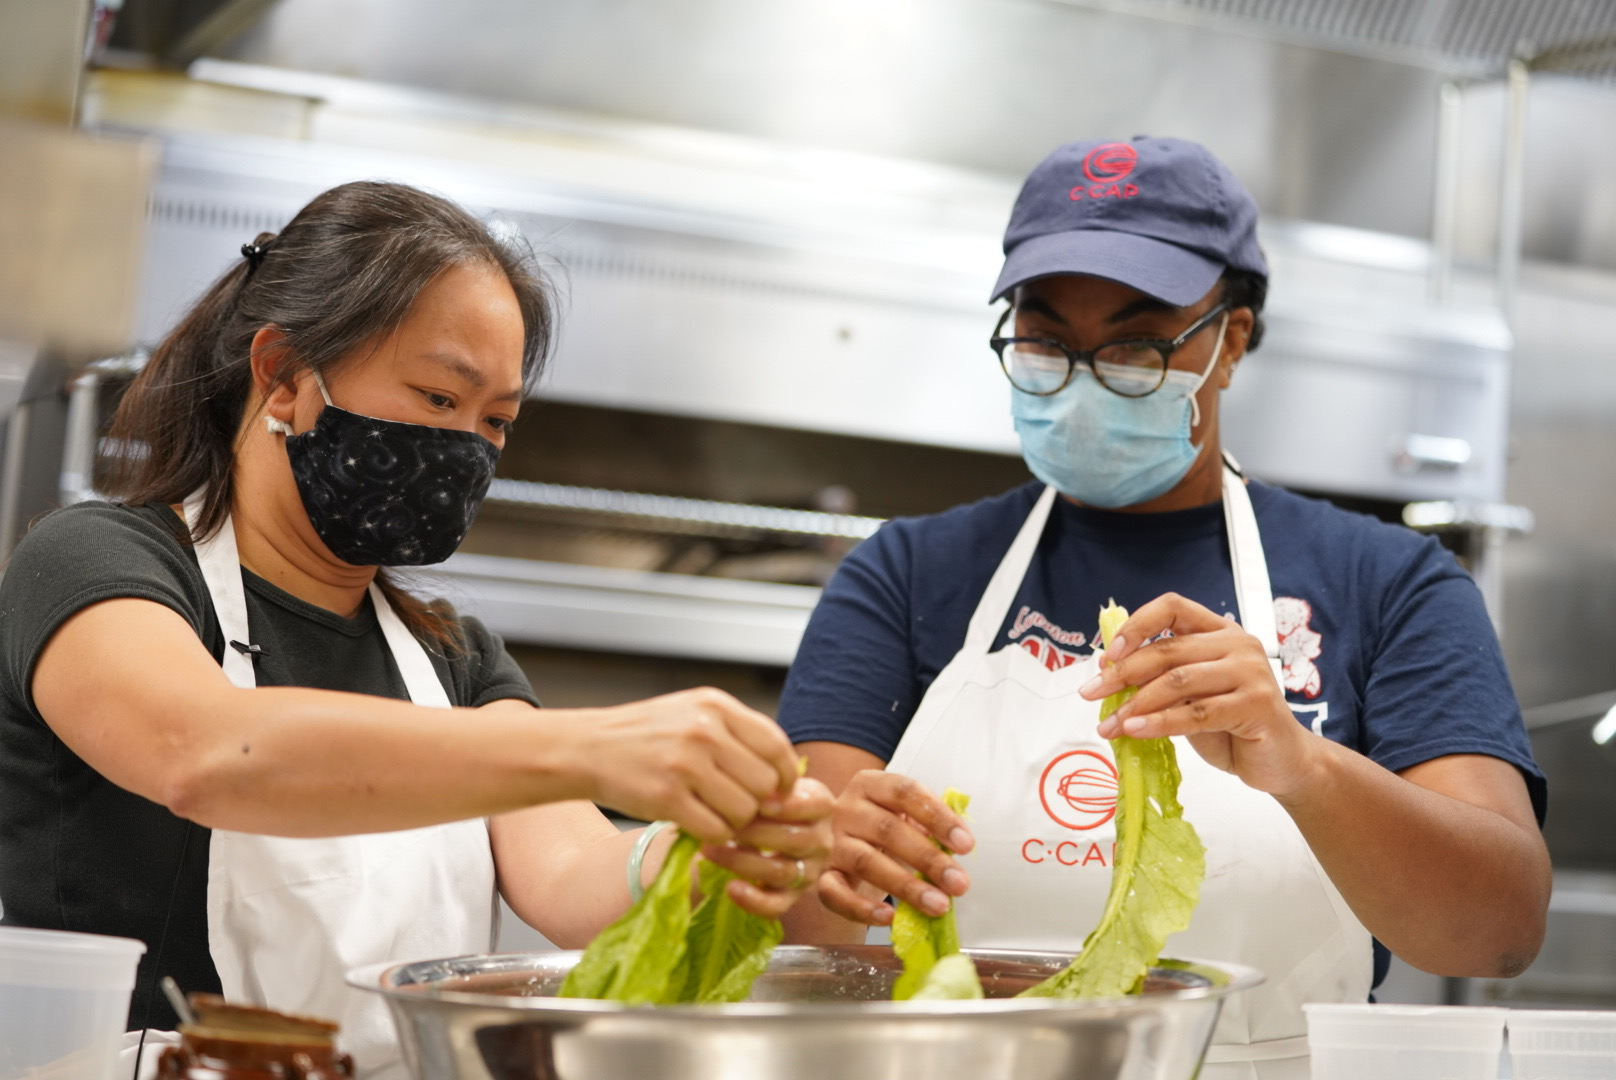 Two people with masks cleaning a bowl of vegetables